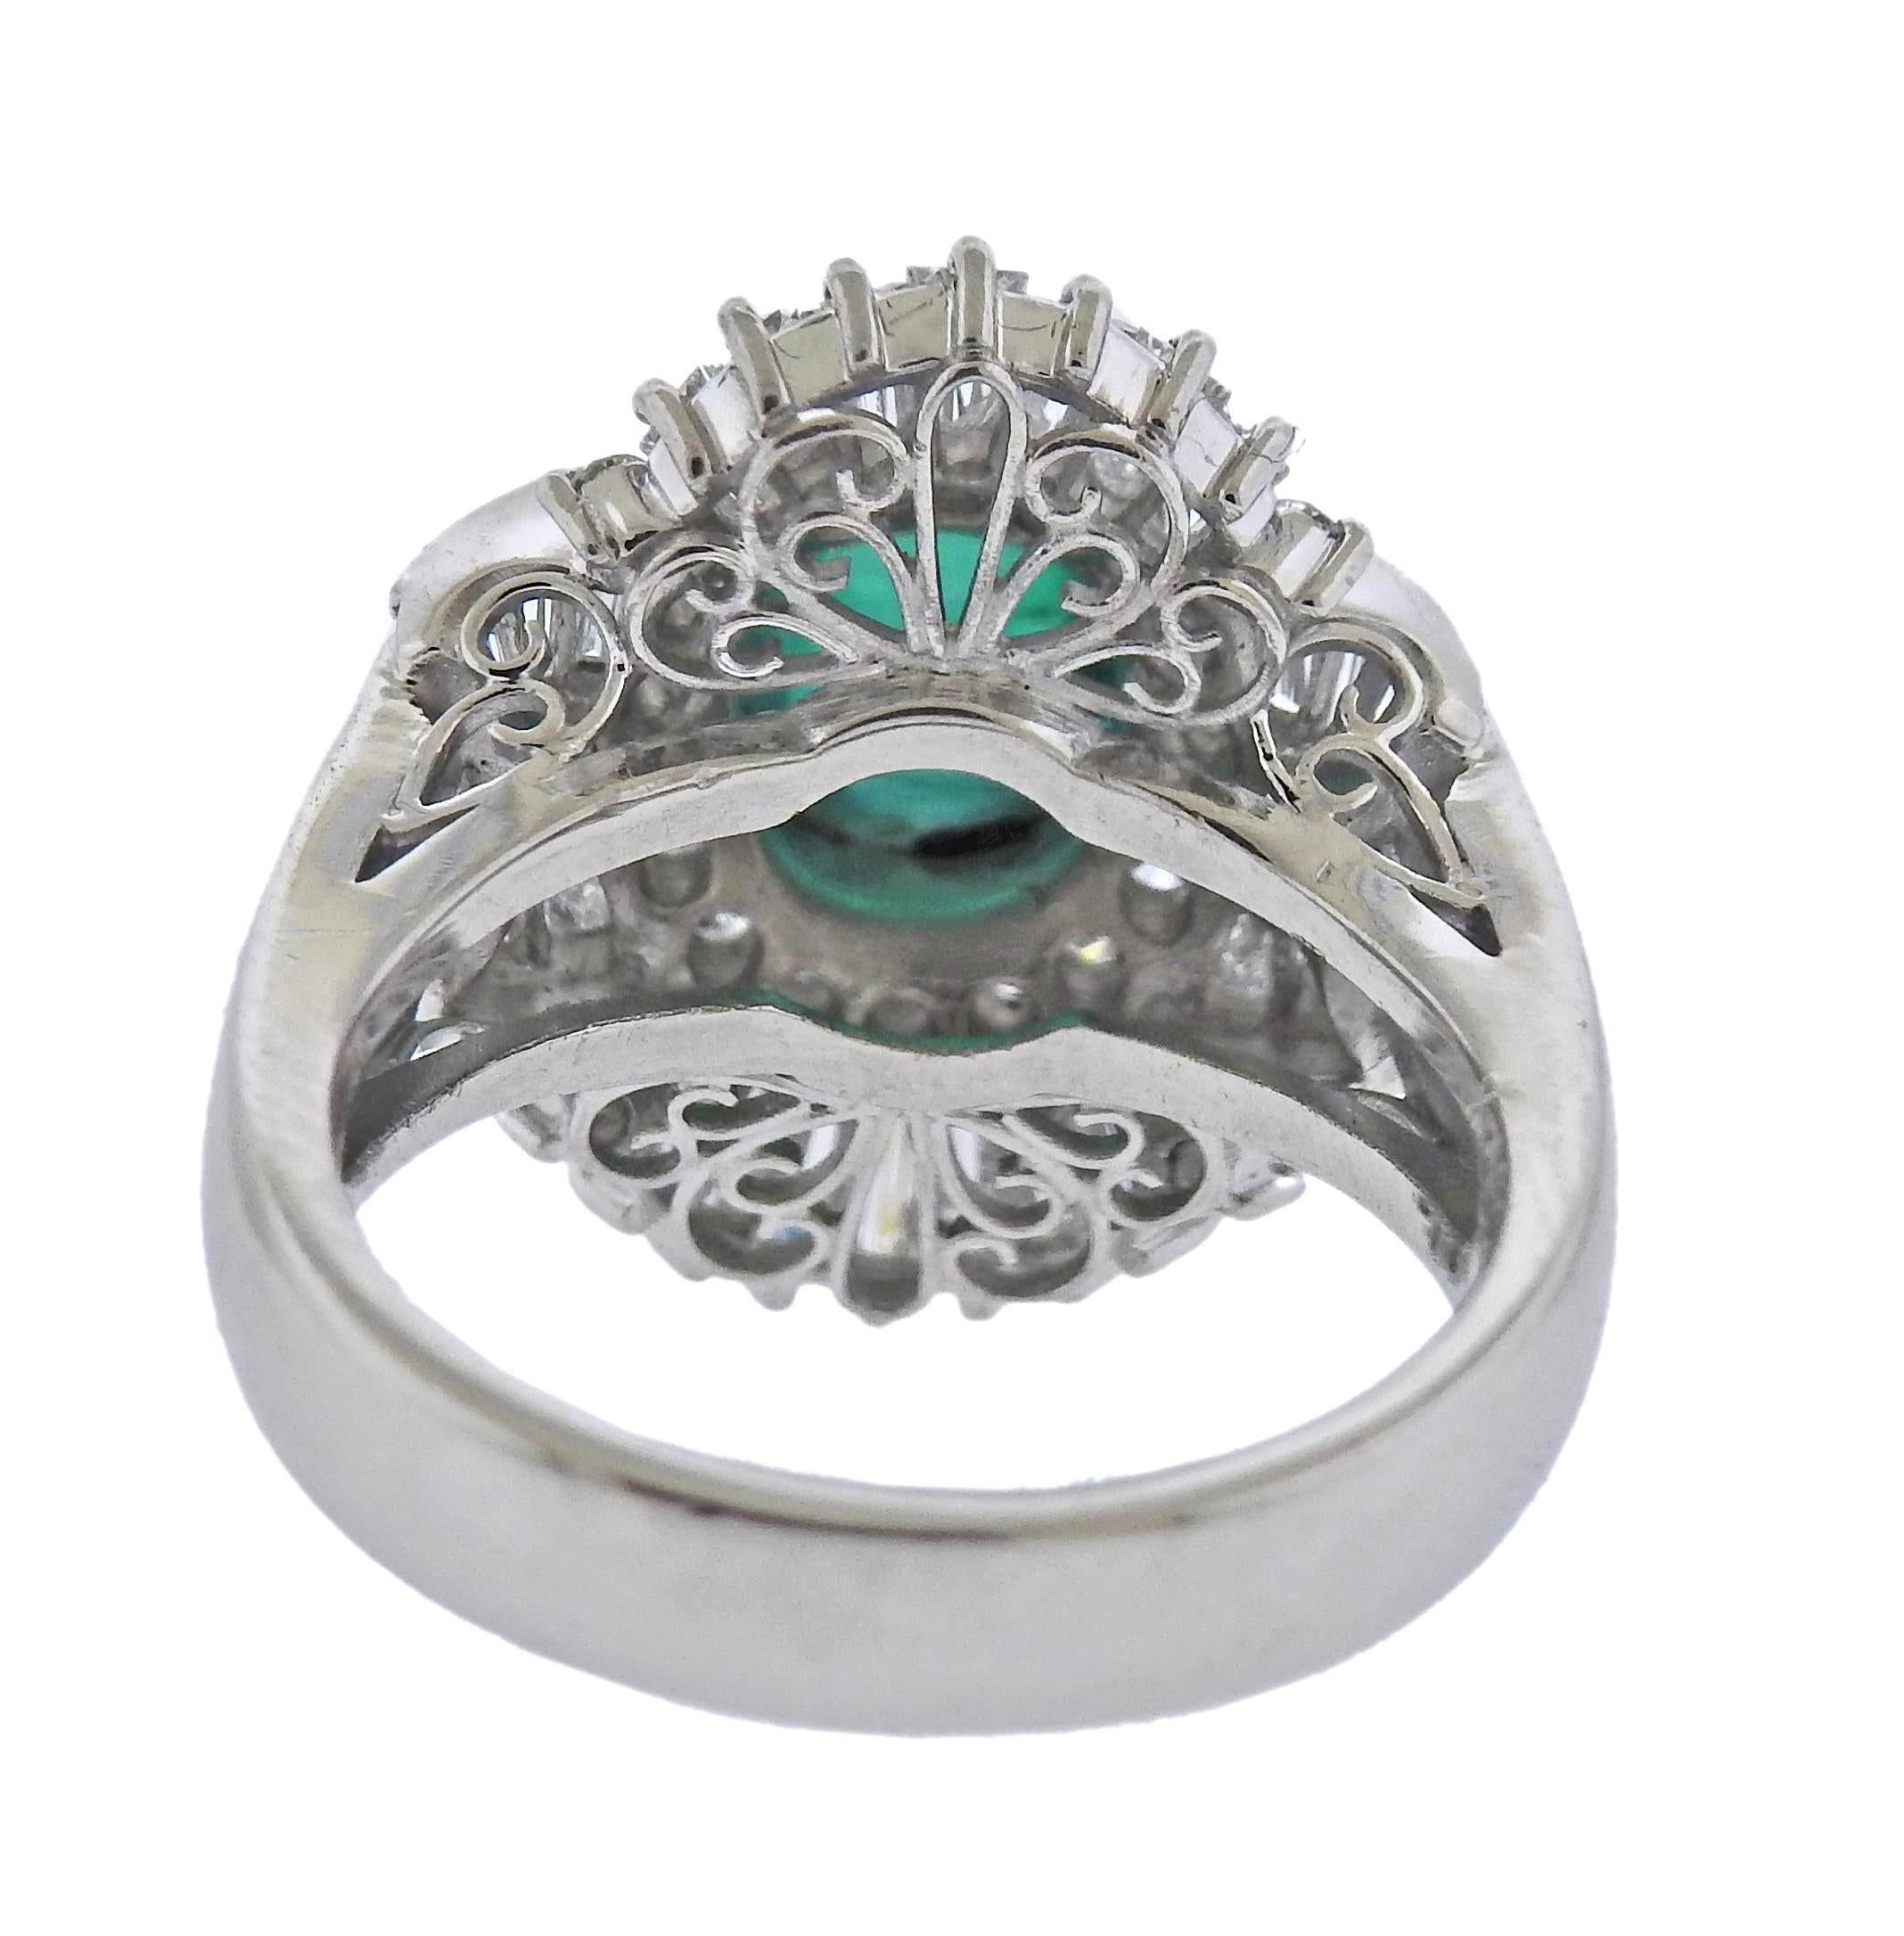 2.47 Carat Emerald Cabochon Diamond Platinum Ring In Excellent Condition For Sale In New York, NY